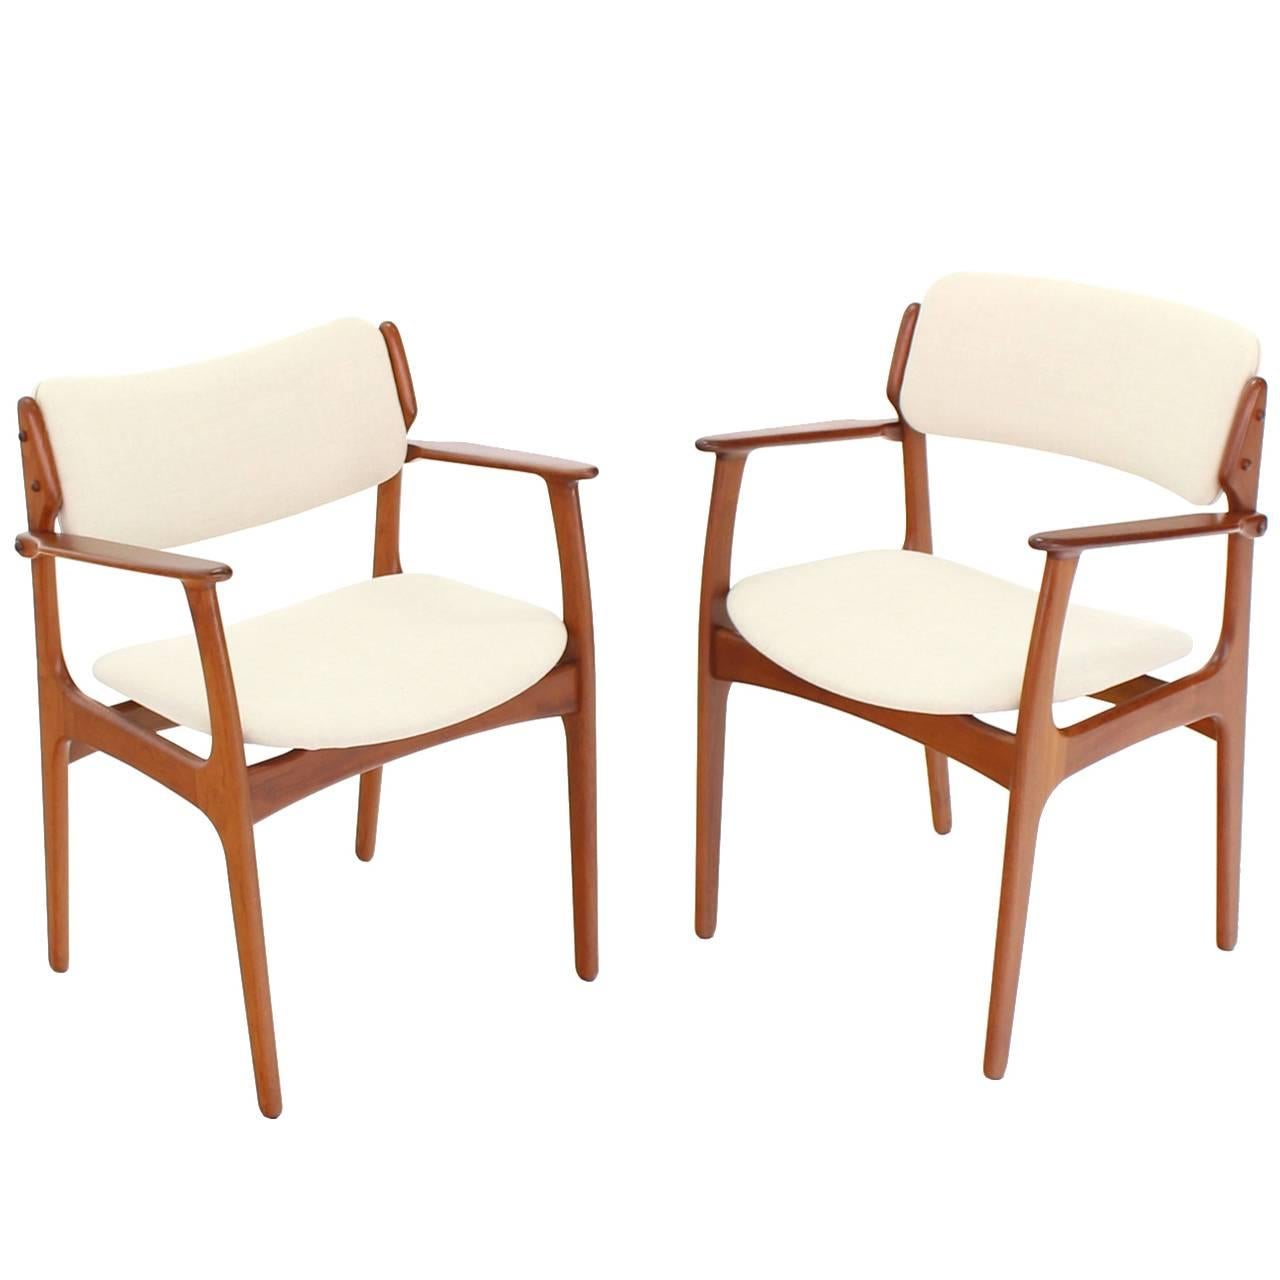 Pair of Two Danish Mid Century Modern Arm Dining Chairs